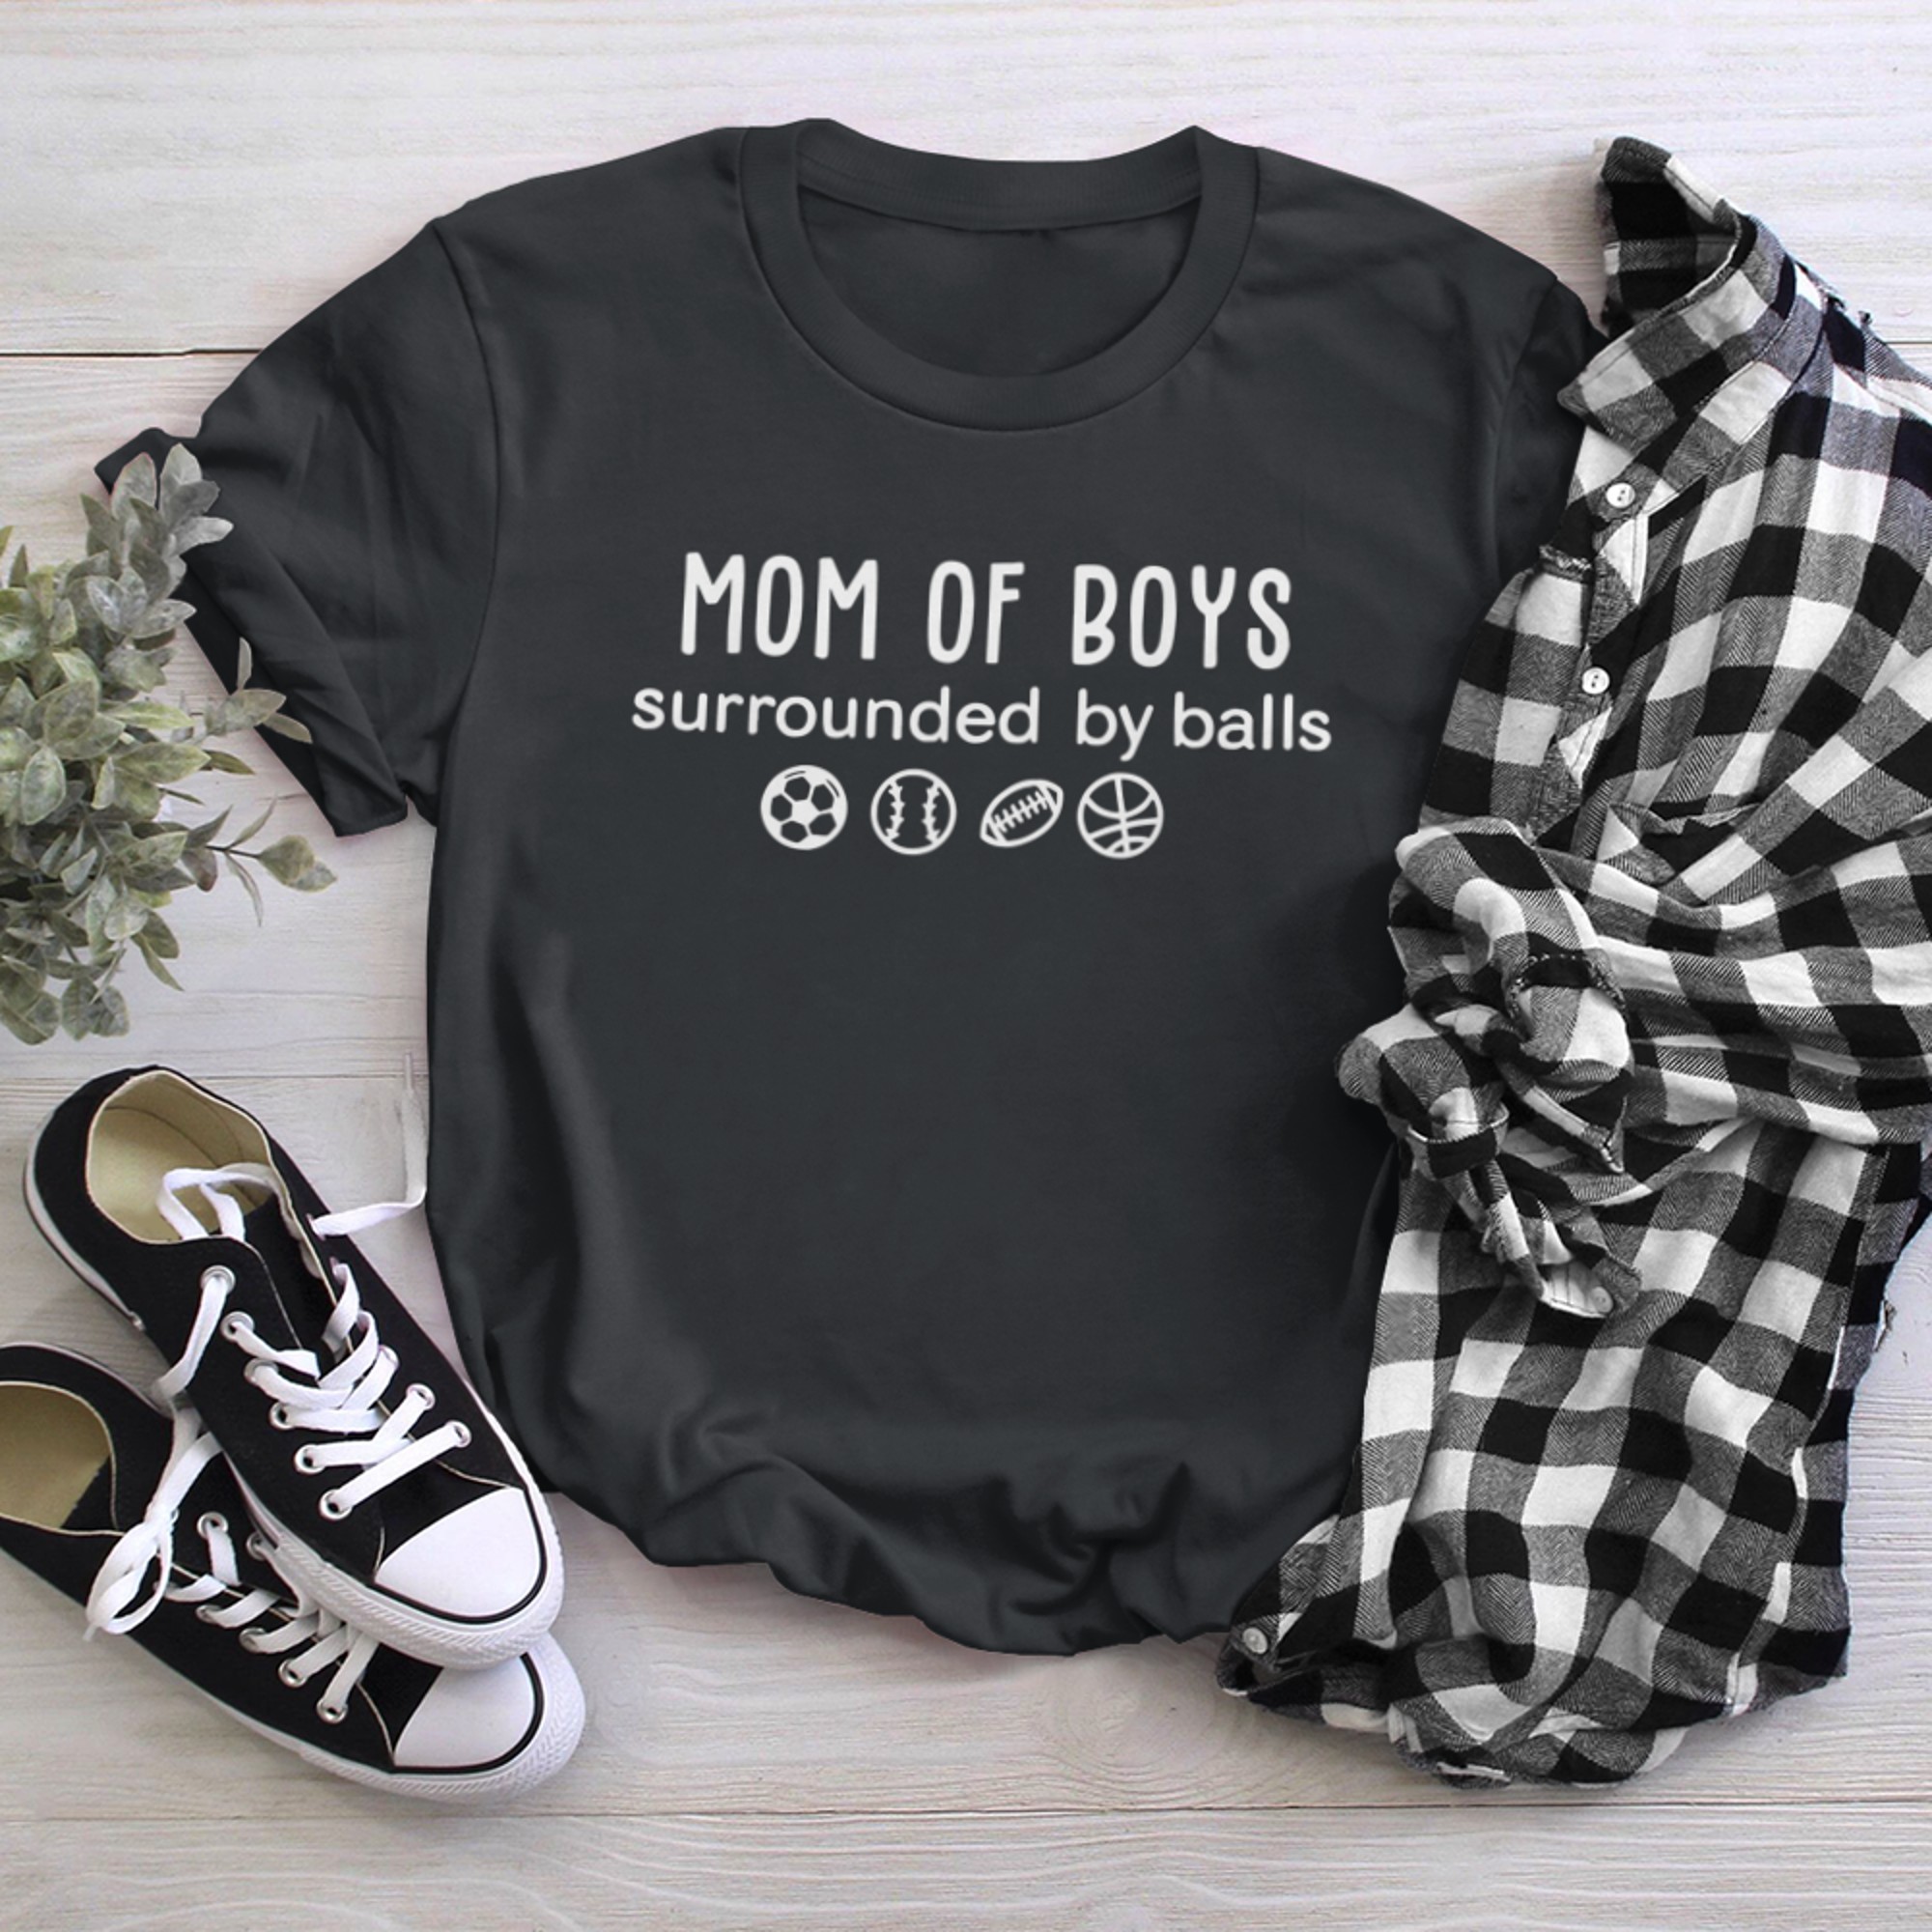 Mom Of Surrounded By Balls (4) t-shirt black